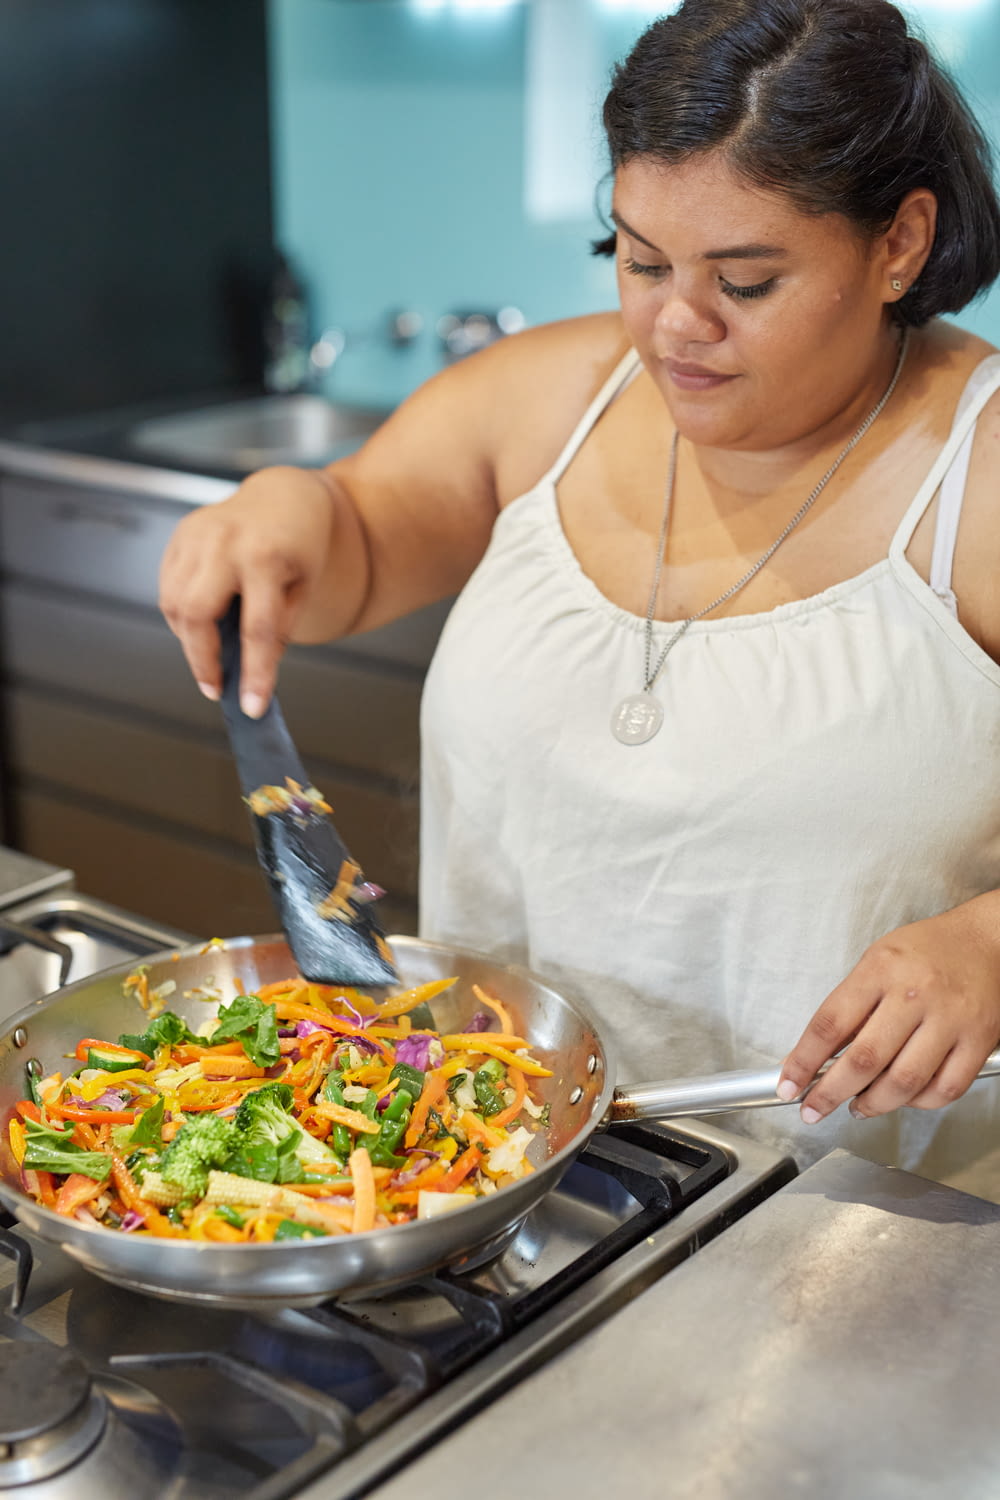 a woman in a white tank top is cooking vegetables